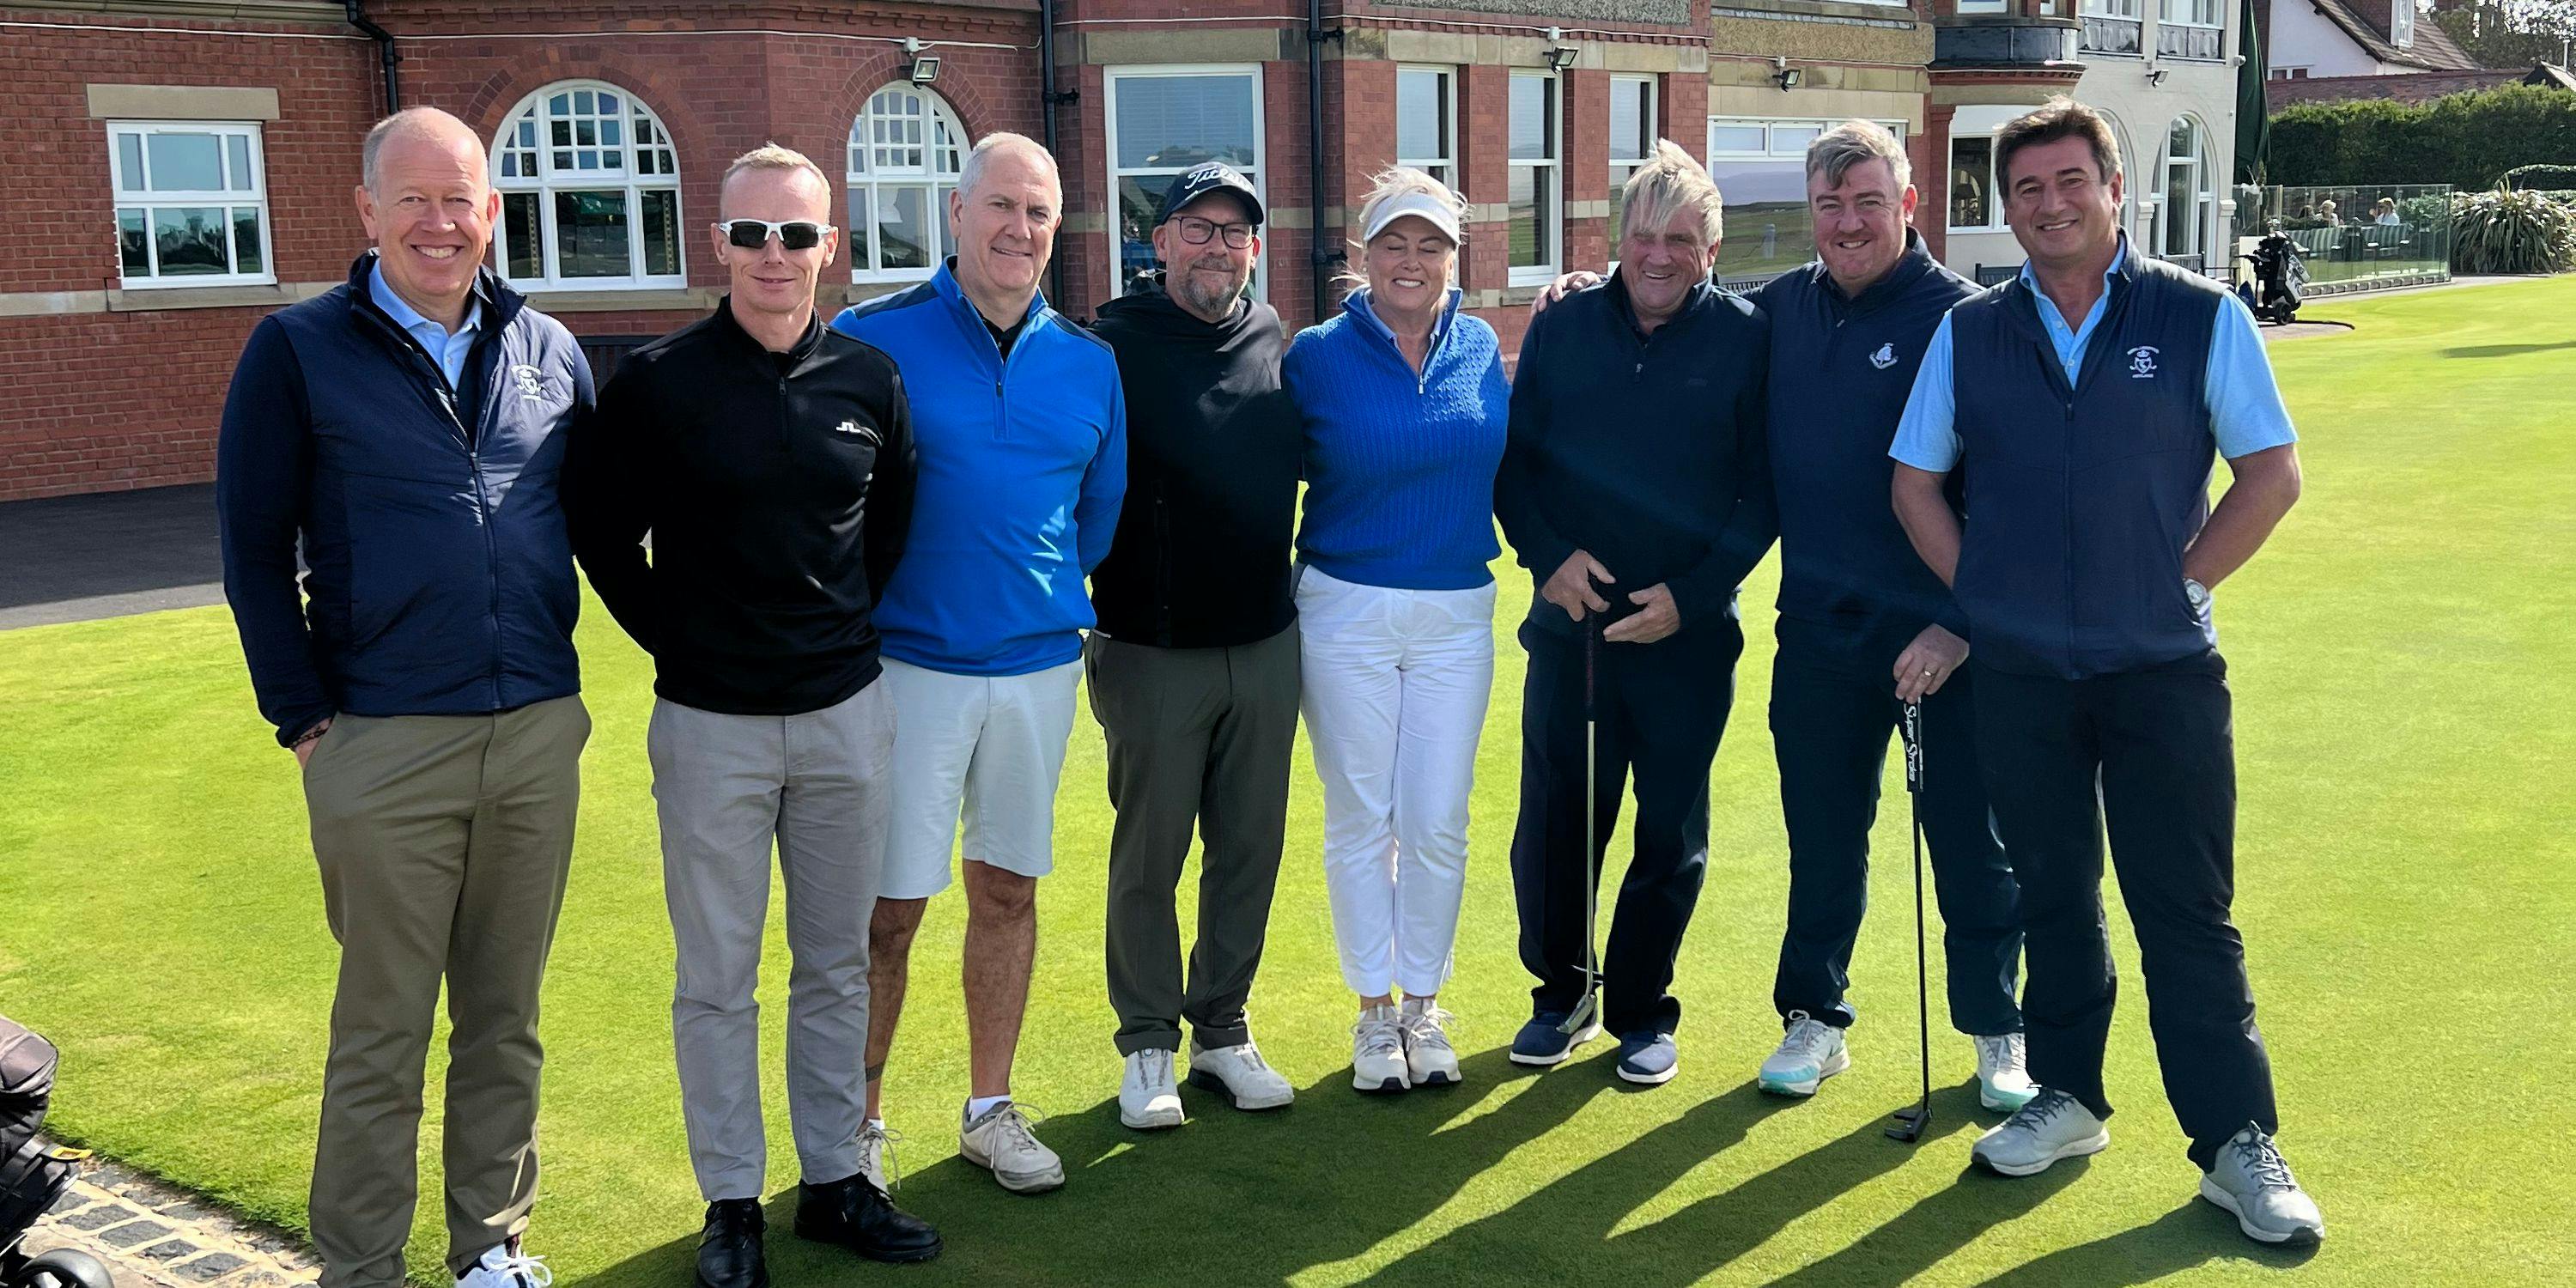 Wasps Legends , including Adam Share and his guests enjoyed two four balls at Royal Liverpool following his Auction win in La Manga Golf Classic 2023.